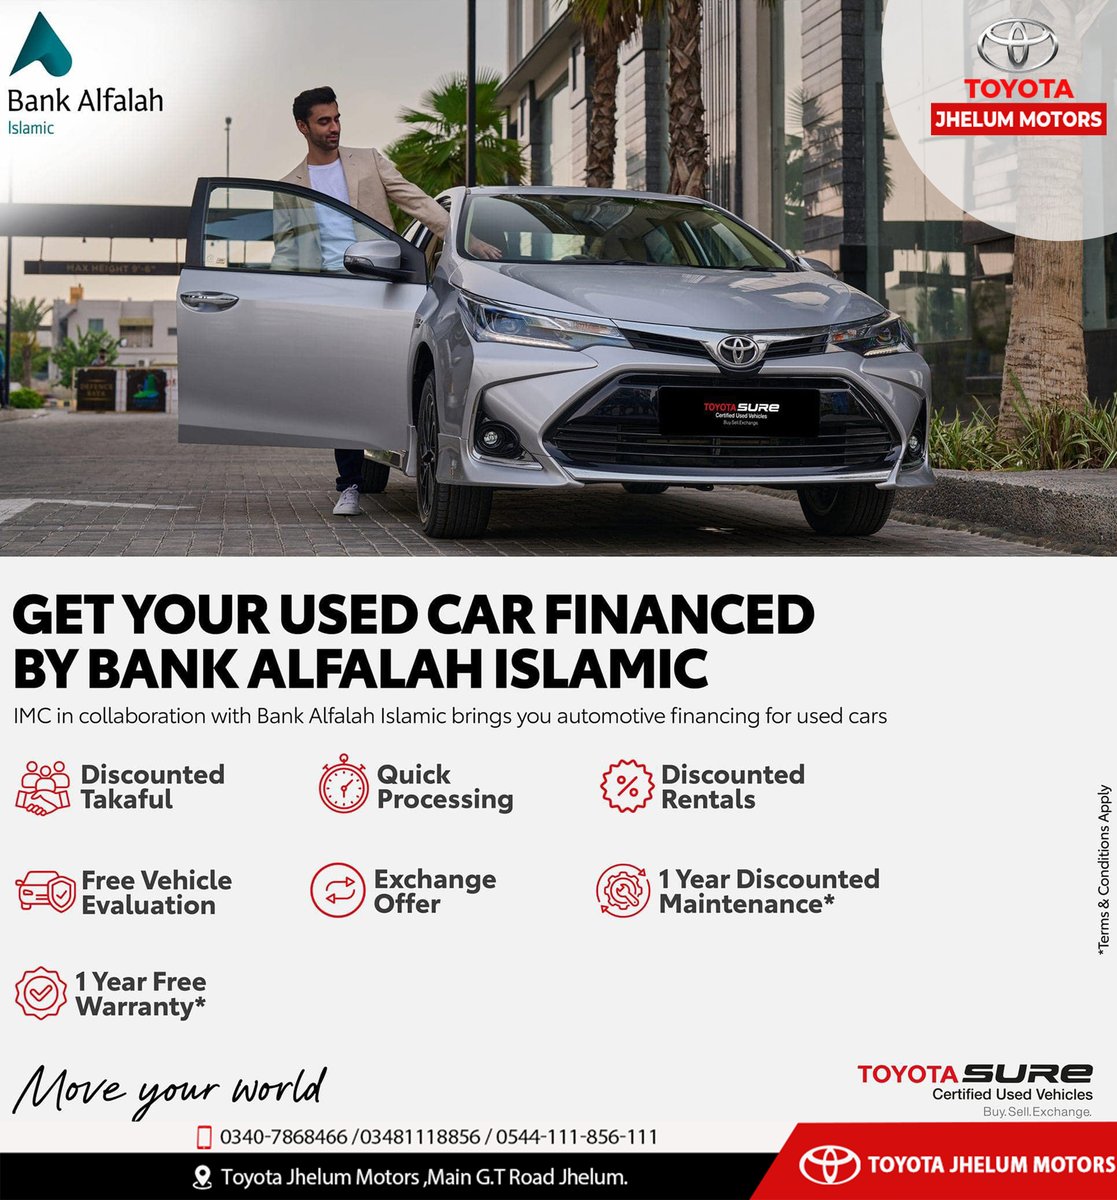 Accelerate into savings with our Limited-Time Offer!
Finance your Toyota Sure Certified Used Vehicle today & Enjoy Exclusive Rentals via Bank Alfalah Islamic!
Be Sure with Toyota Sure!
#ToyotaJhelumMotors #TOYOTASURE #Tsure   #tsurecertifiedusedcarbazaar #FreeInsurance